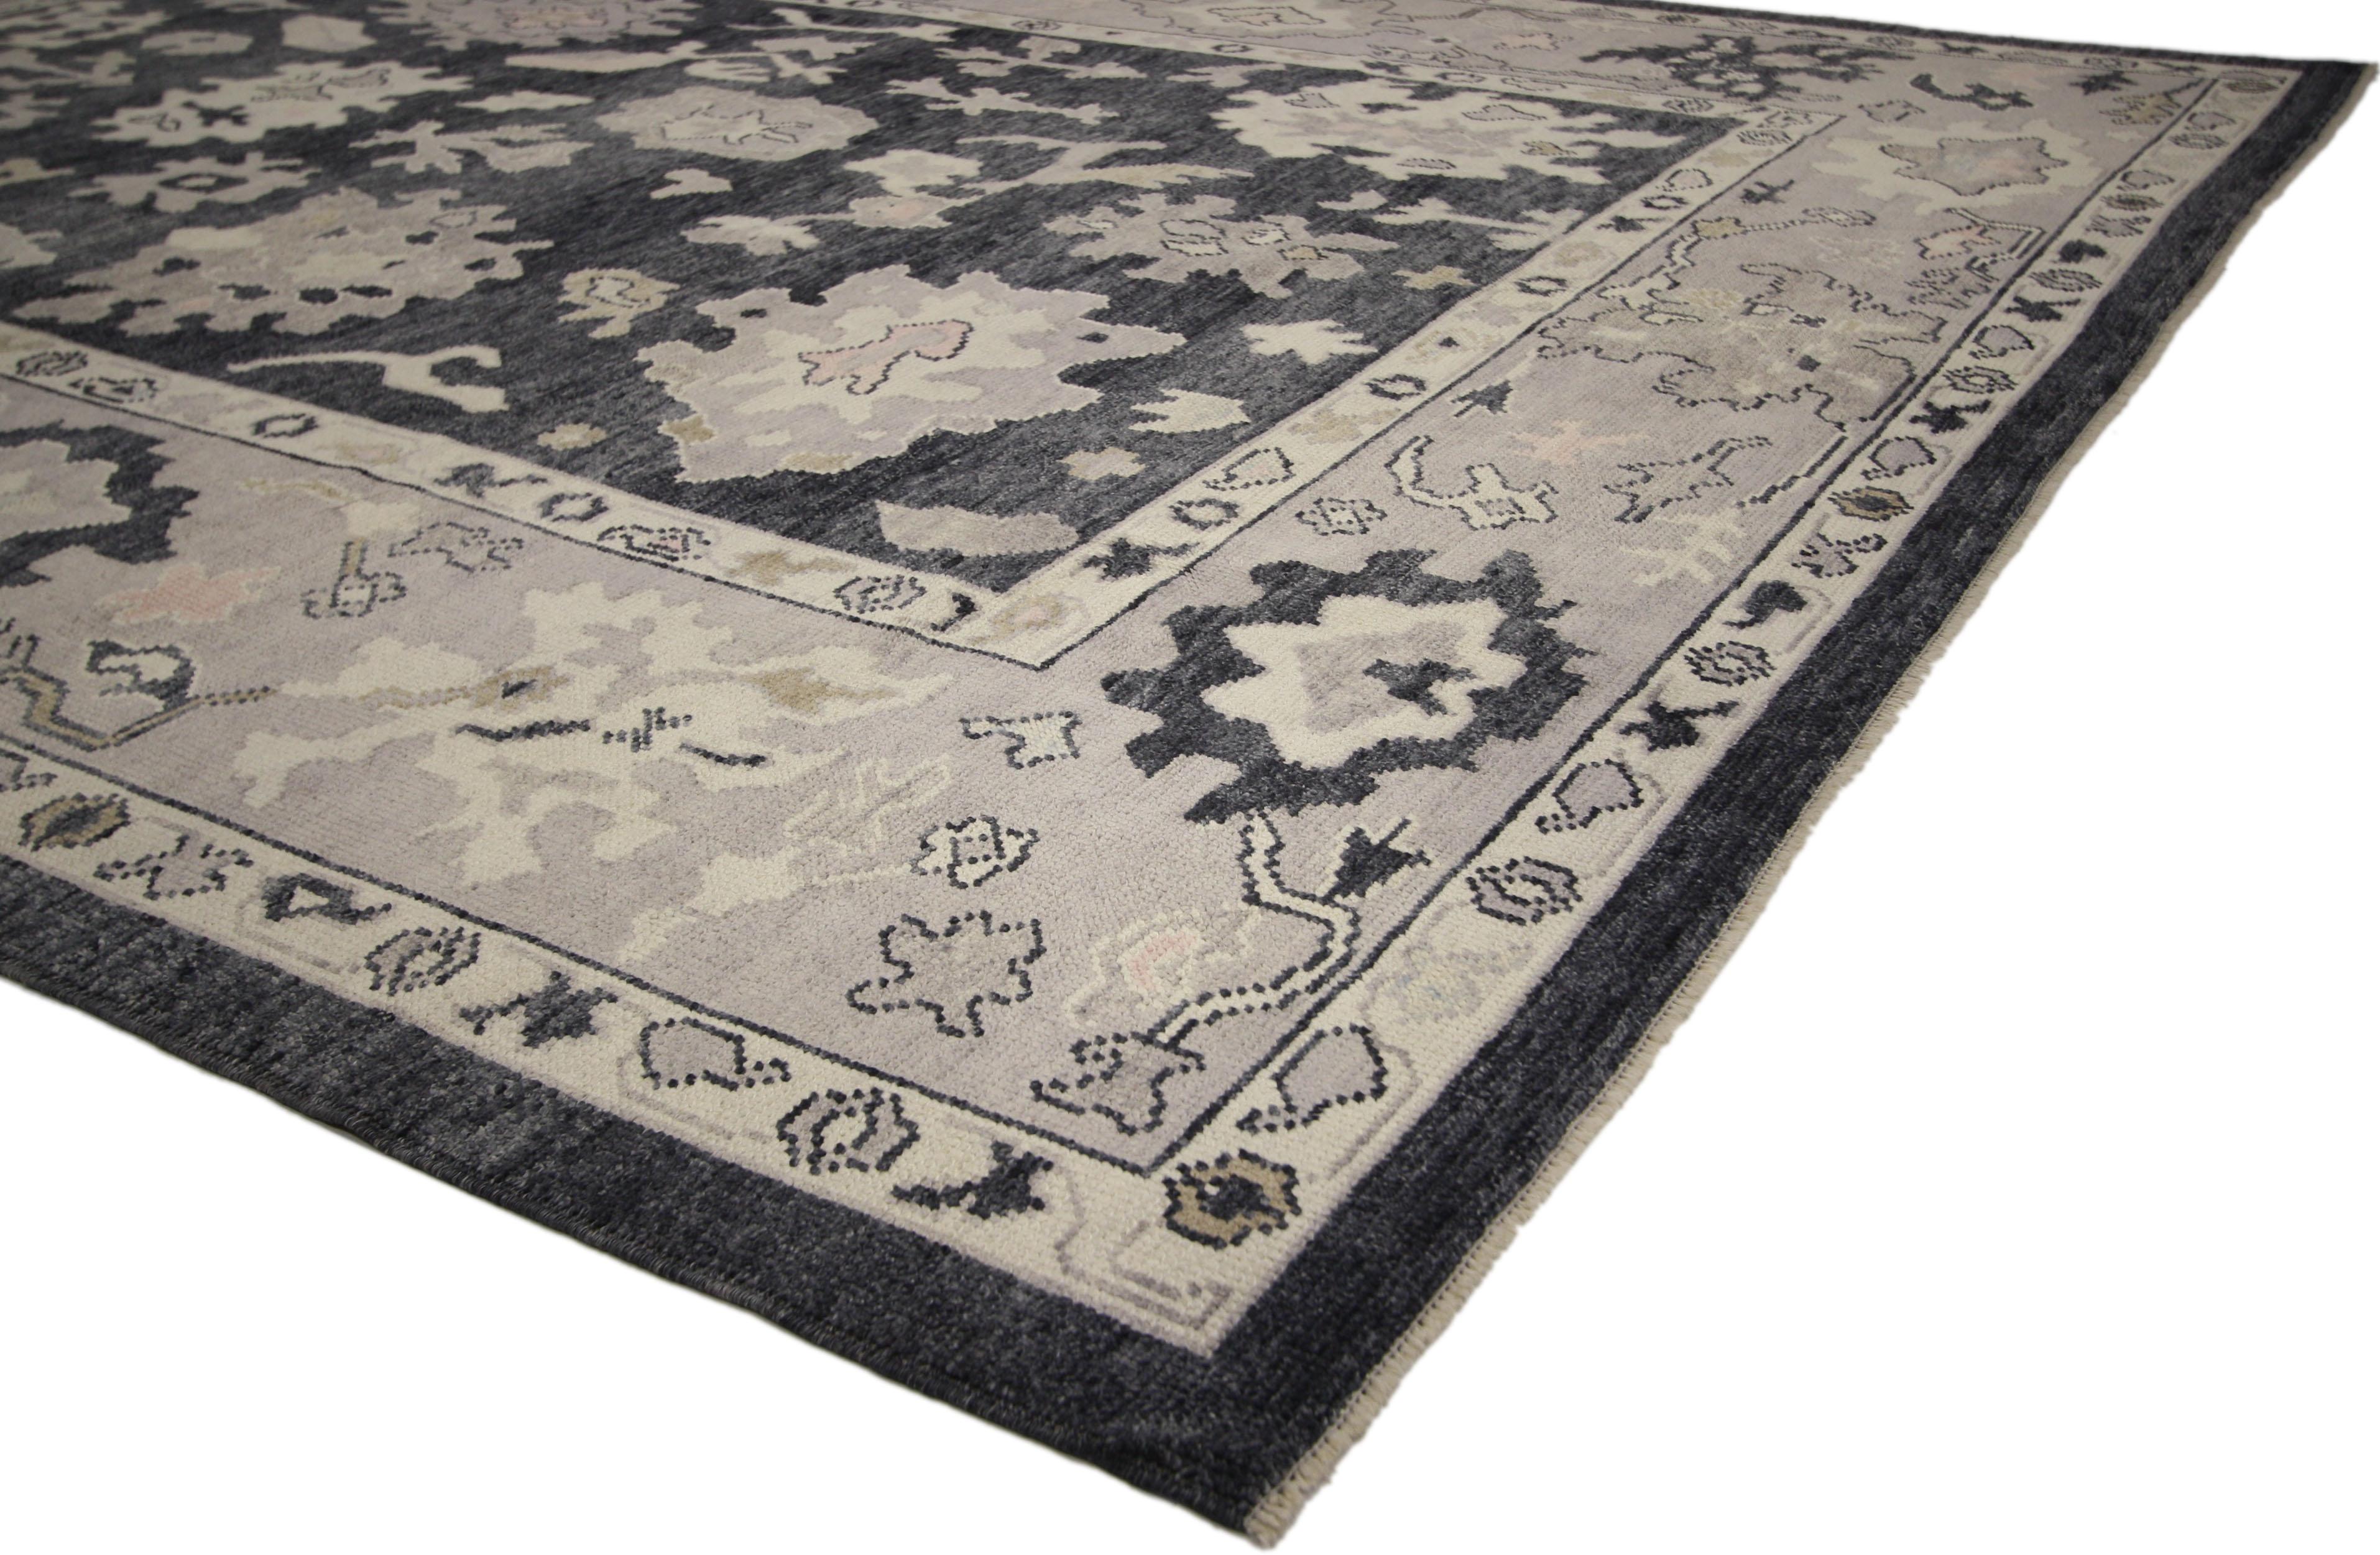 52361 New contemporary black Turkish Oushak rug with Modern Style 09'04 x 12'01. With its elegant sophistication and ornate detailing, this hand-knotted wool contemporary Turkish Oushak area rug embodies Directoire style with Hollywood Regency glam.